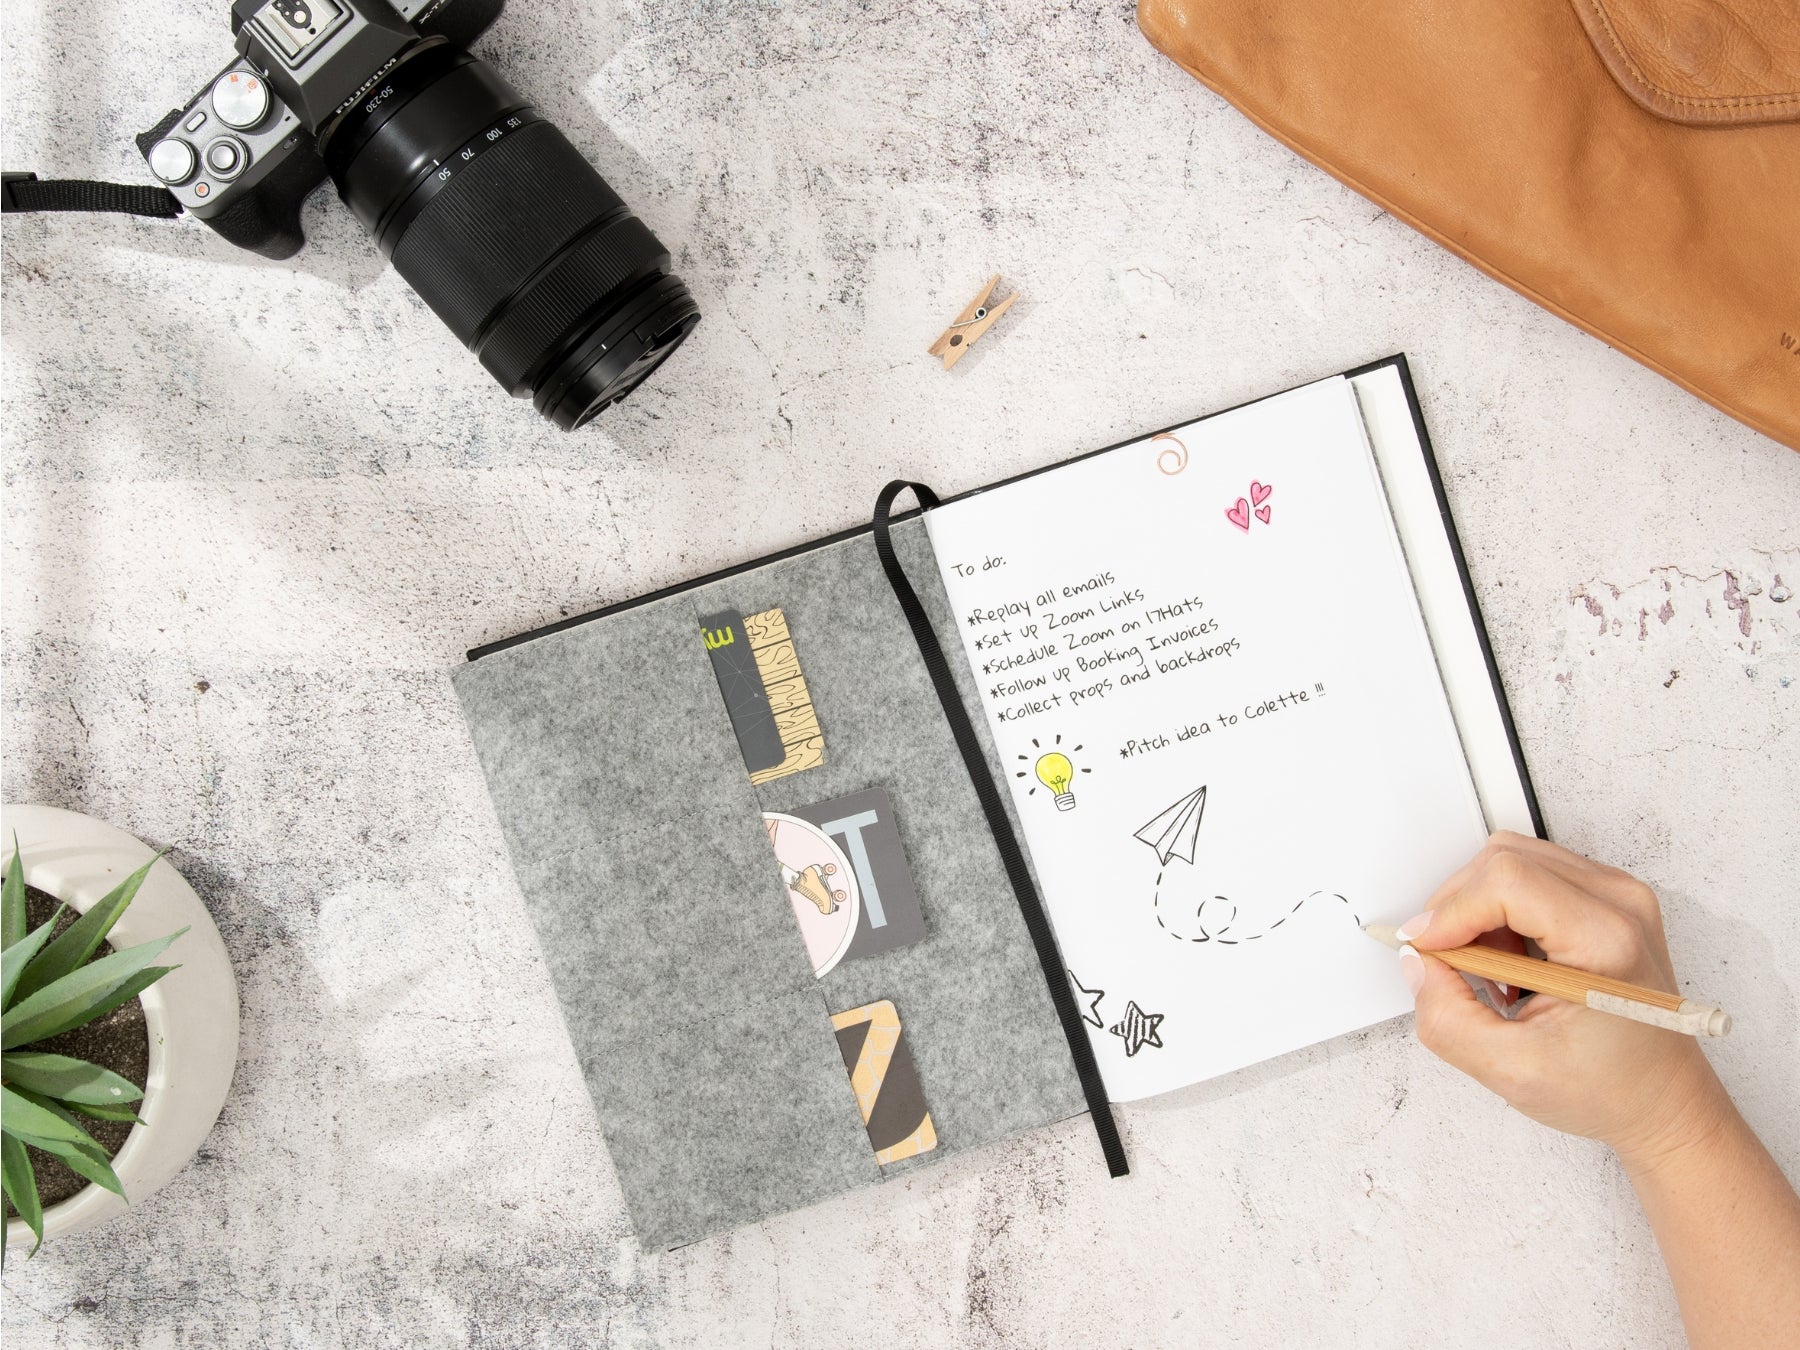 The Paper Saver Reusable Notebook repurposes your used paper as pages for less waste and sustainable zero waste living. Add the Organiser to the Paper Saver for an added pencil case, card and document holders to keep belongings with you at all times.